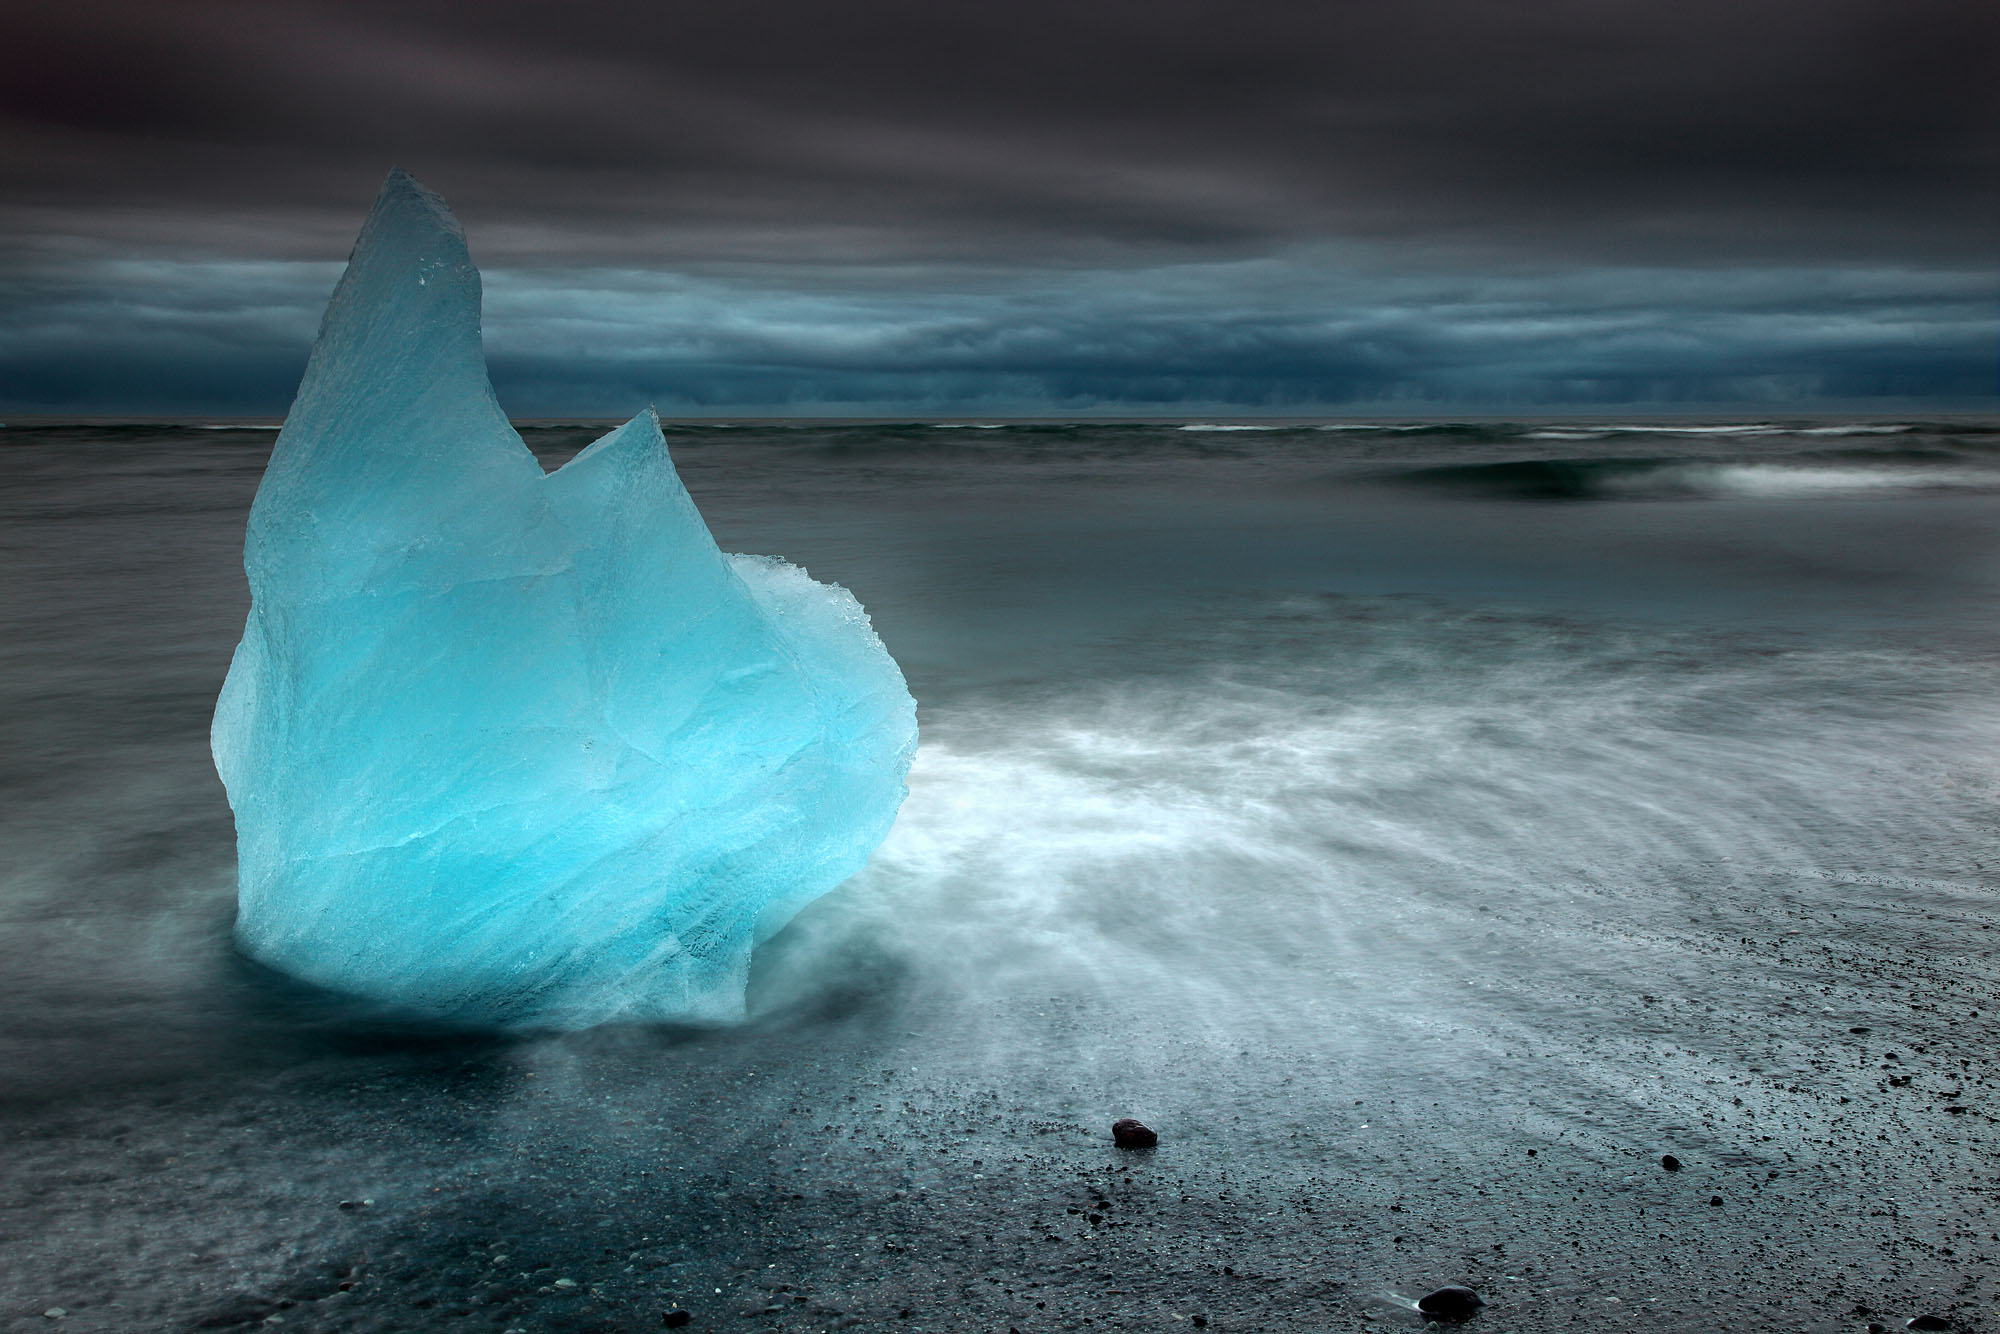 A deep-blue beached iceberg on Jökulsárlón Strandur in Iceland surrounded by waves at low tide close to midnight